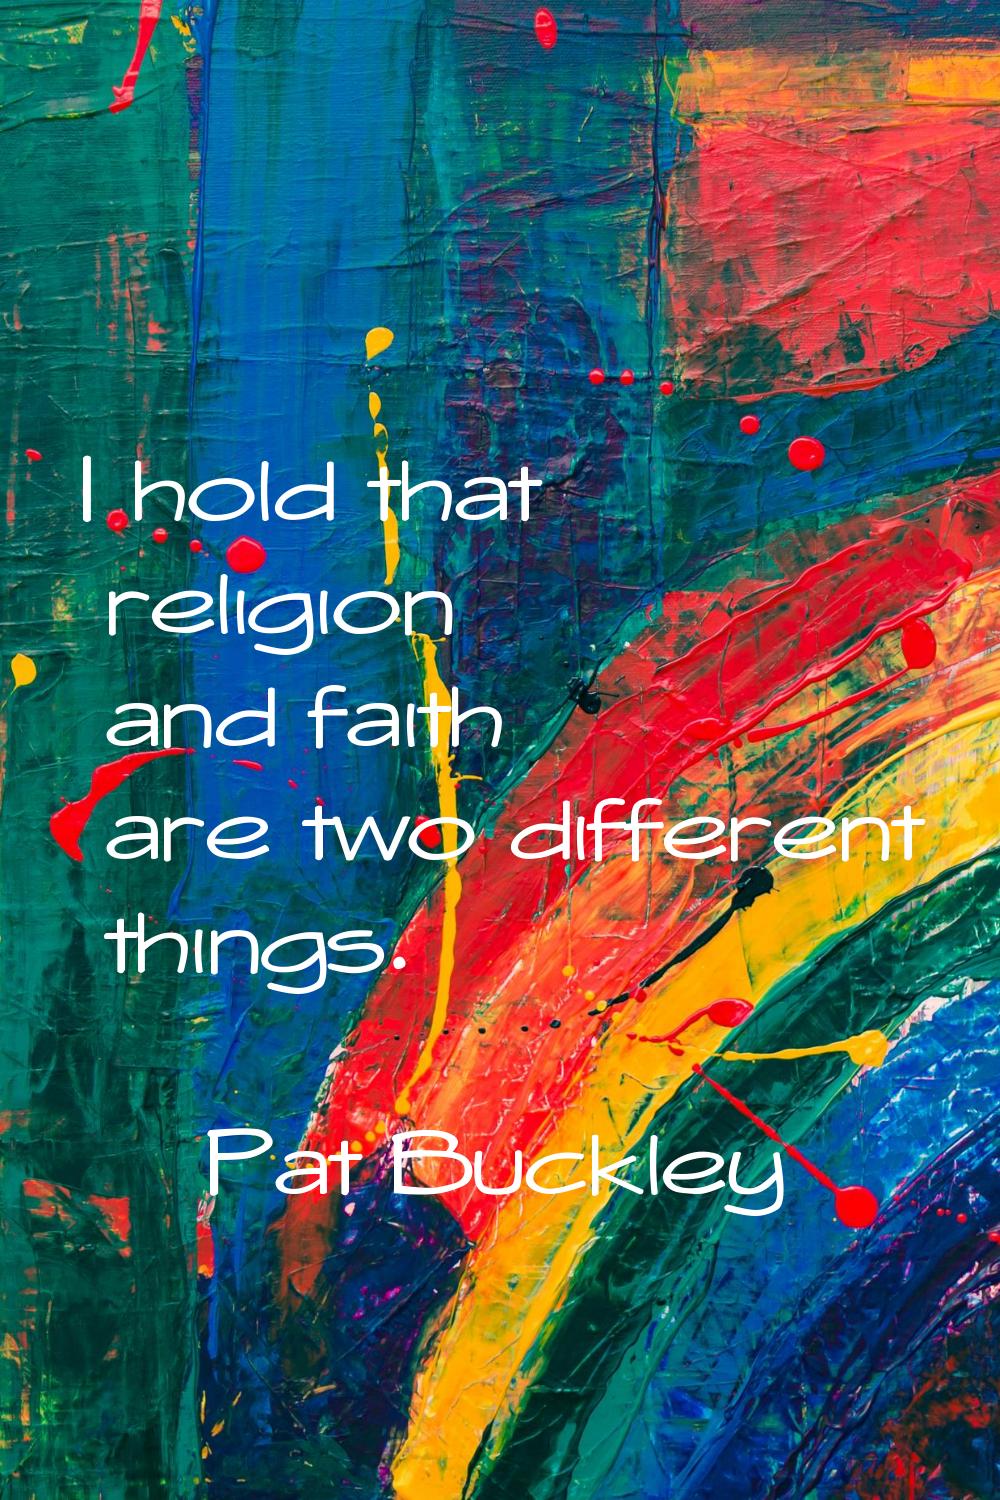 I hold that religion and faith are two different things.